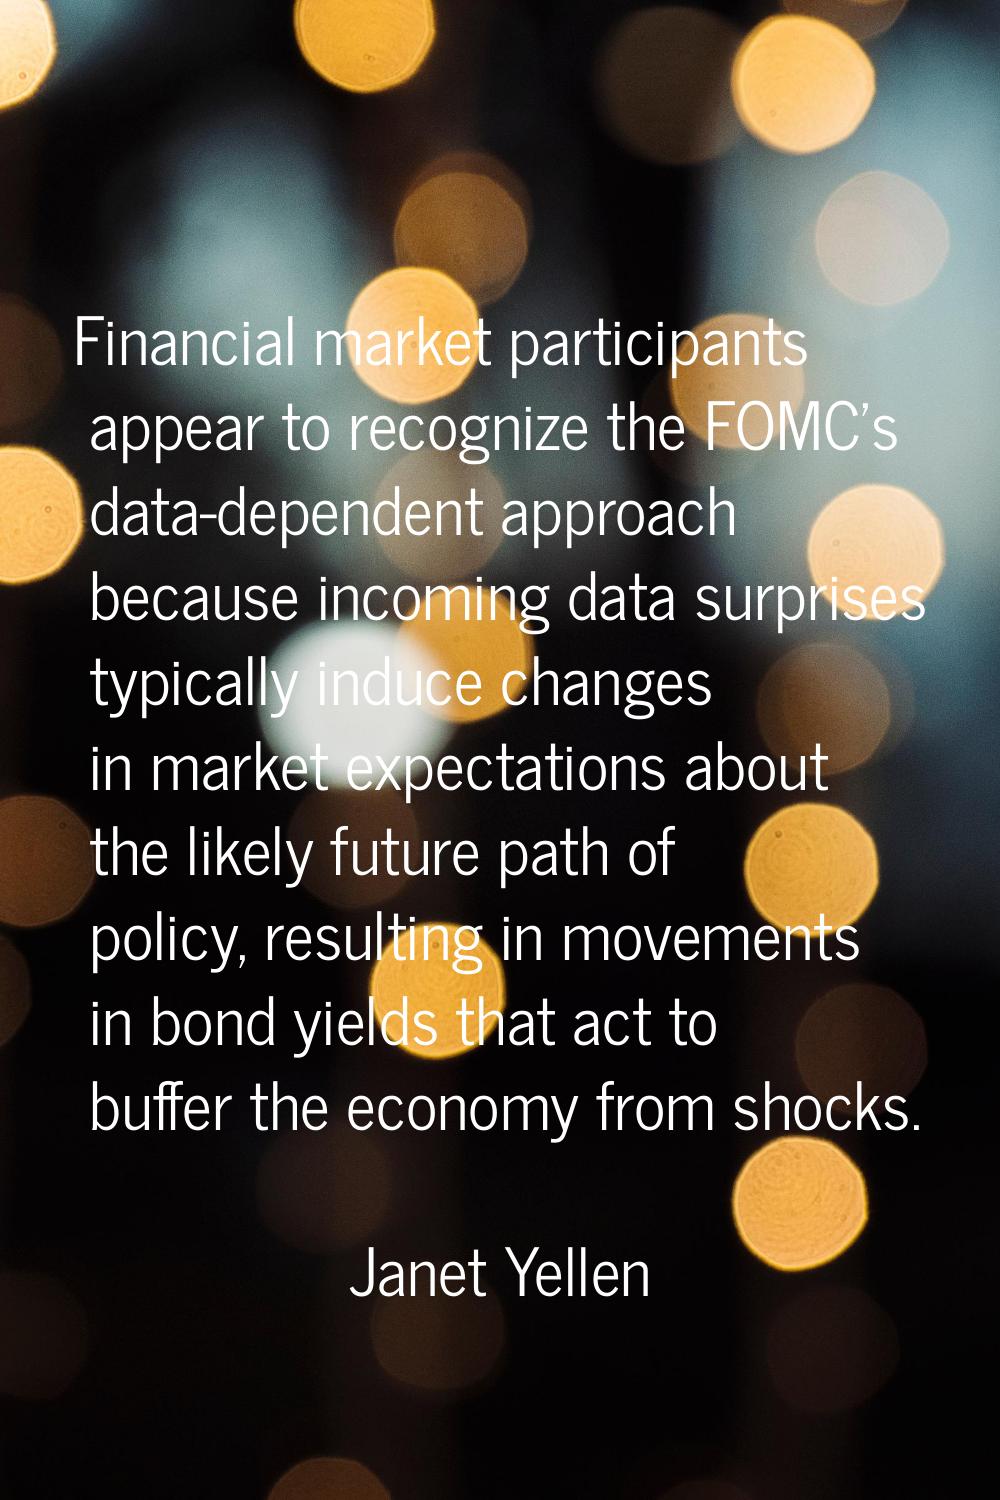 Financial market participants appear to recognize the FOMC's data-dependent approach because incomi